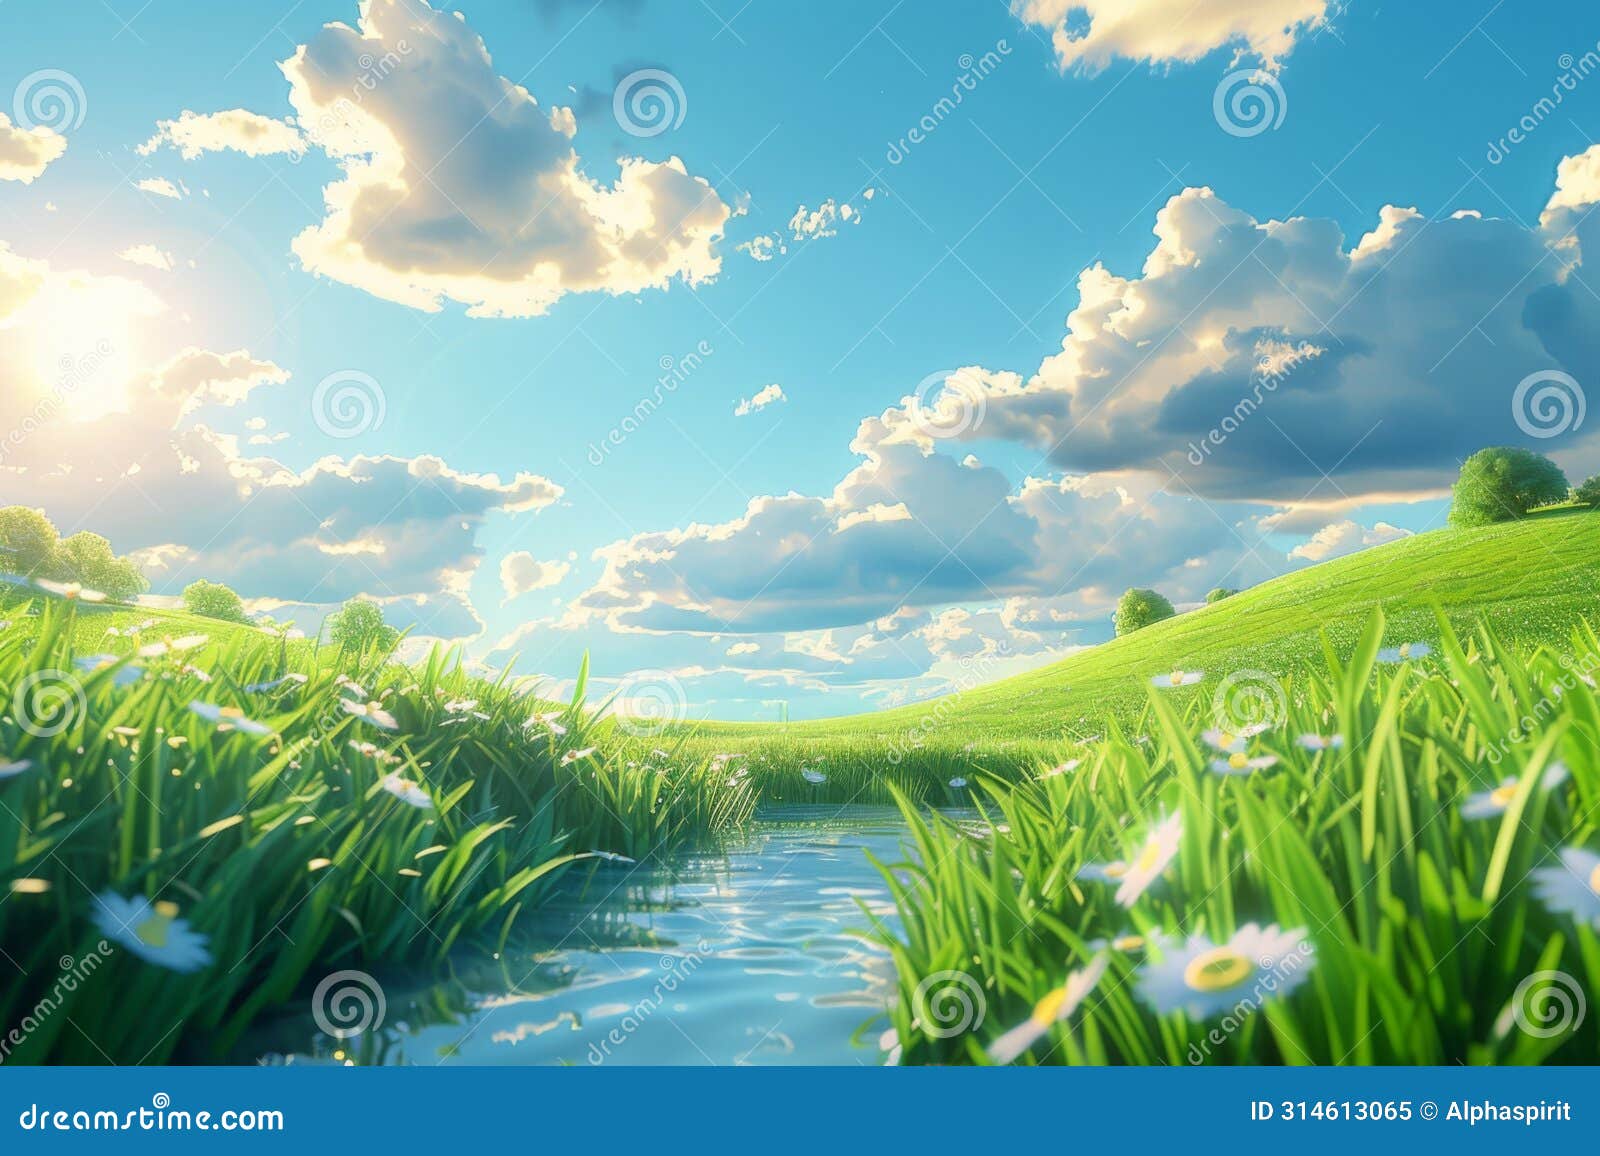 tranquil meadow with wildflowers and serene pond under a cloudy sunset sky